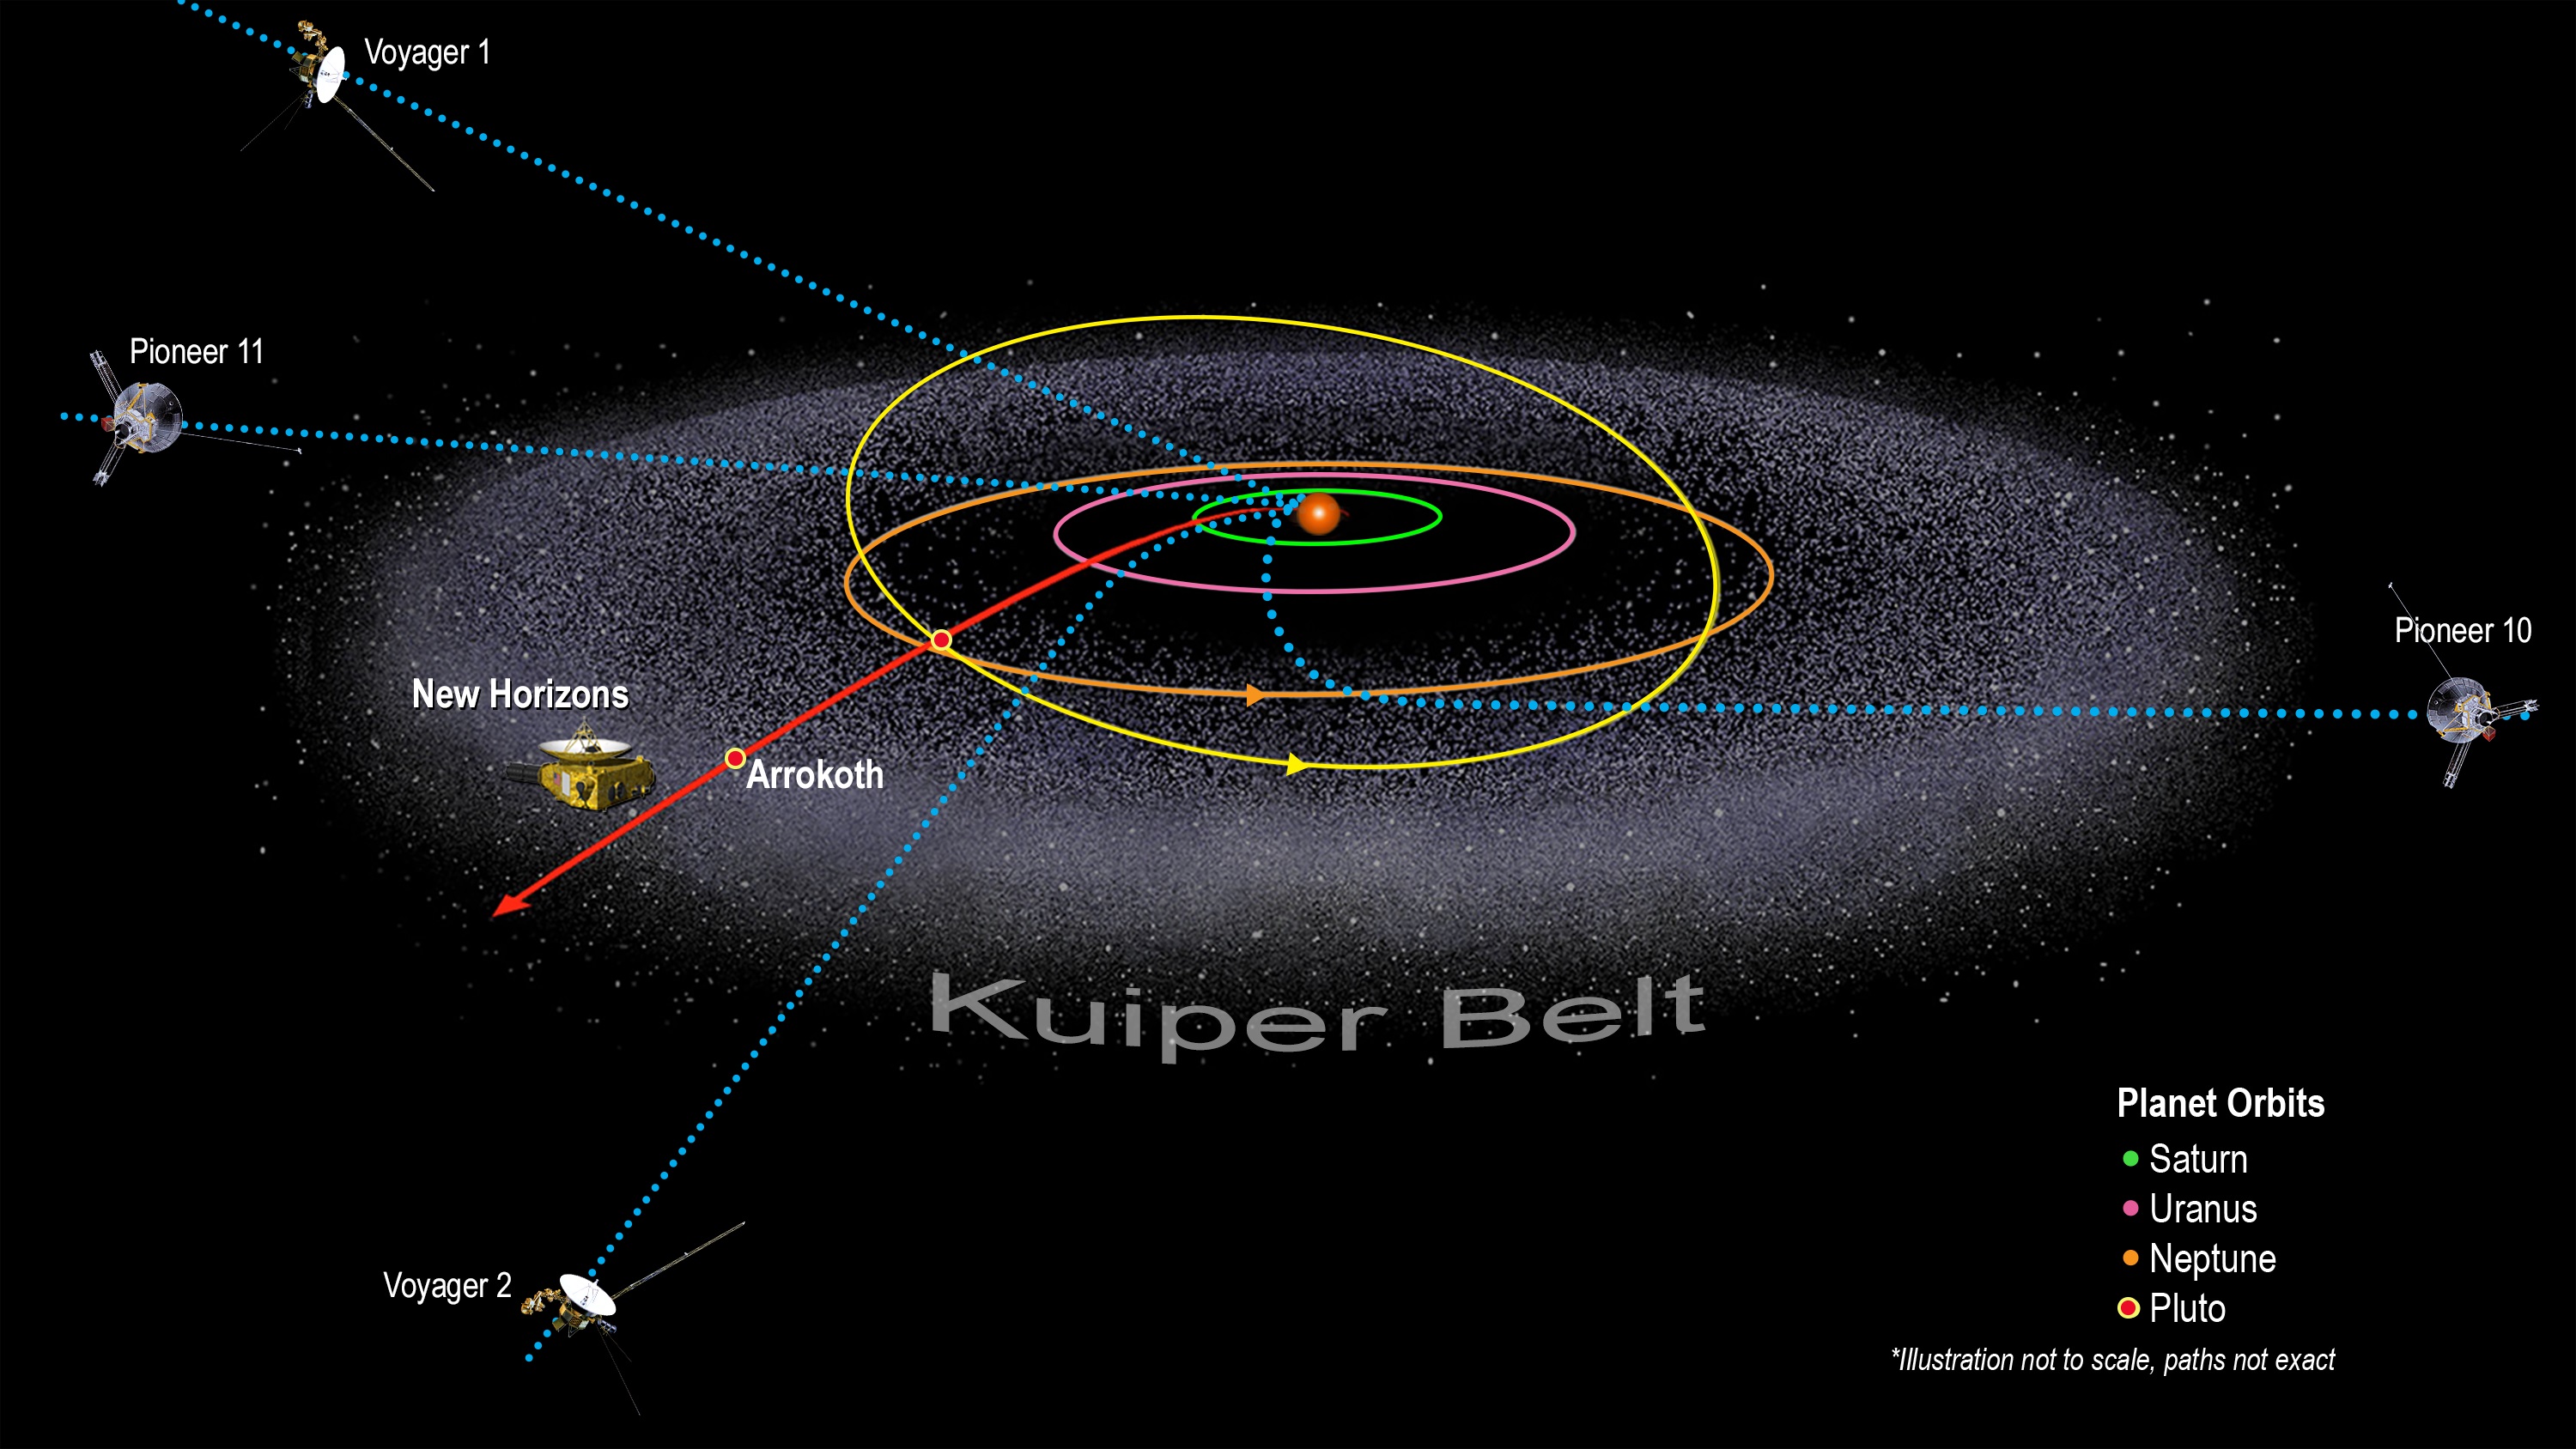 how far is voyager 1 from pluto